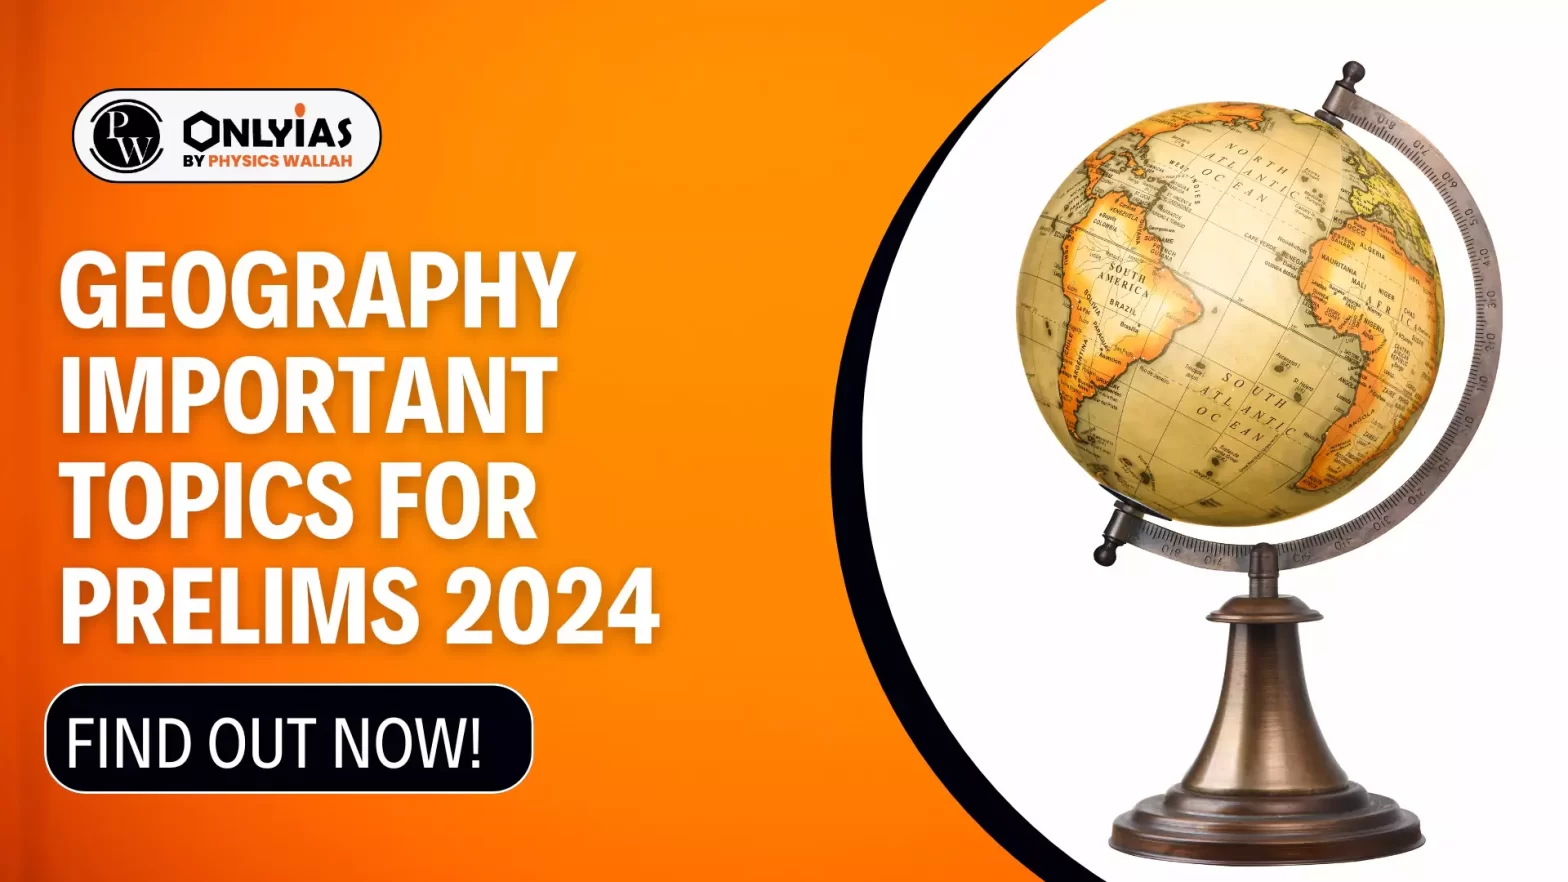 Geography Important Topics for Prelims 2024, Find Out Now!